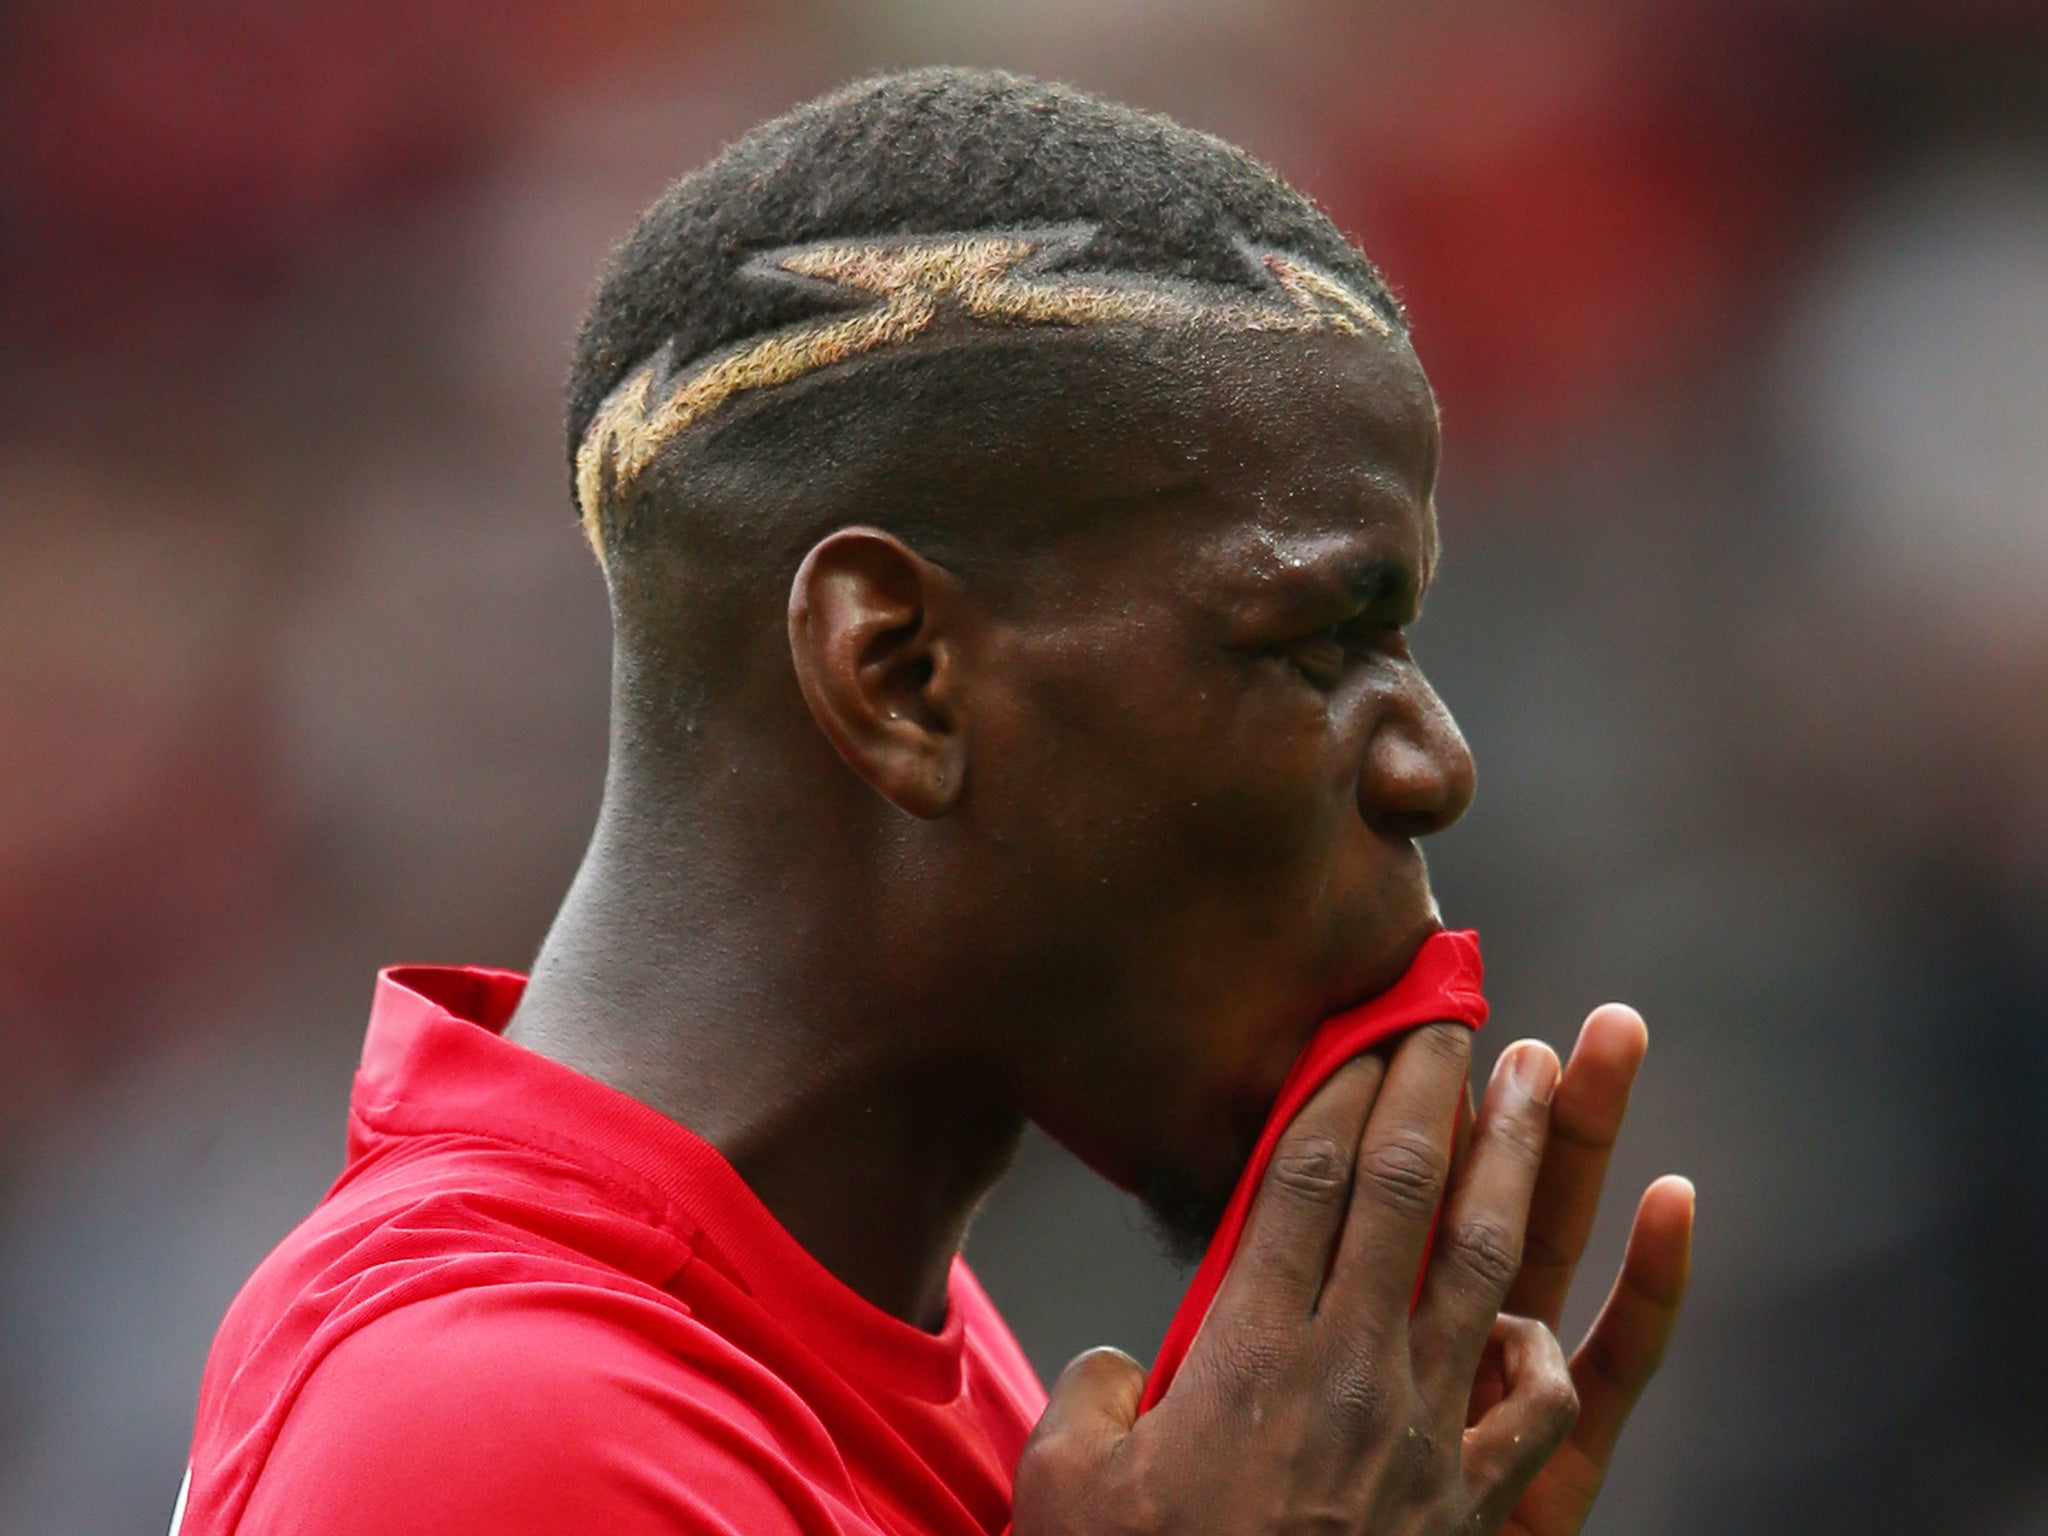 Pogba failed to have much impact on proceedings against City